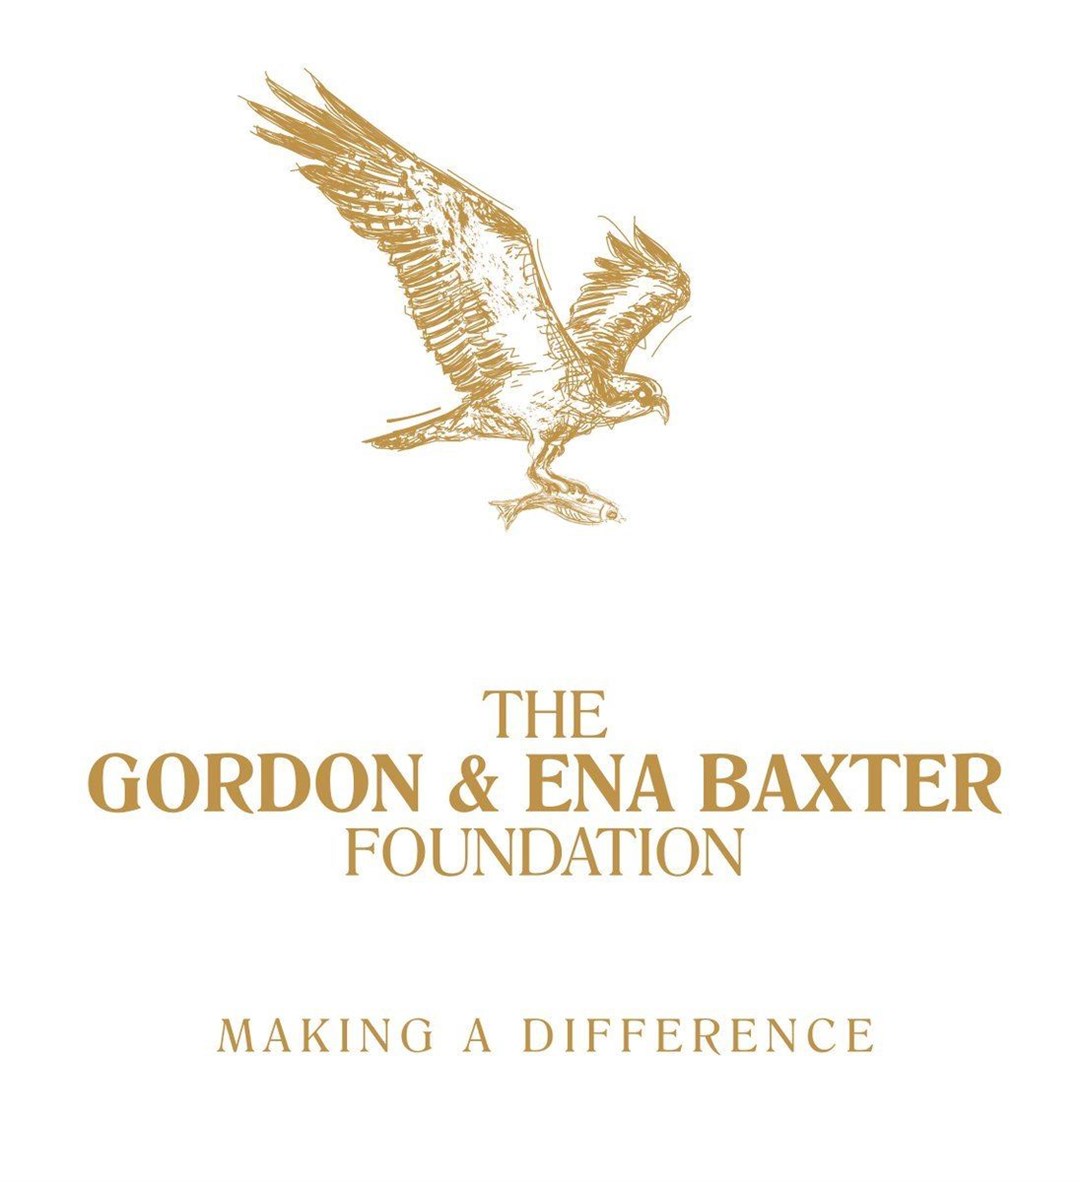 The Gordon and Ena Baxter Foundation is hosting a Meet the Trustees session at The Gallery in Elgin Library on Monday, running from 1-4pm.